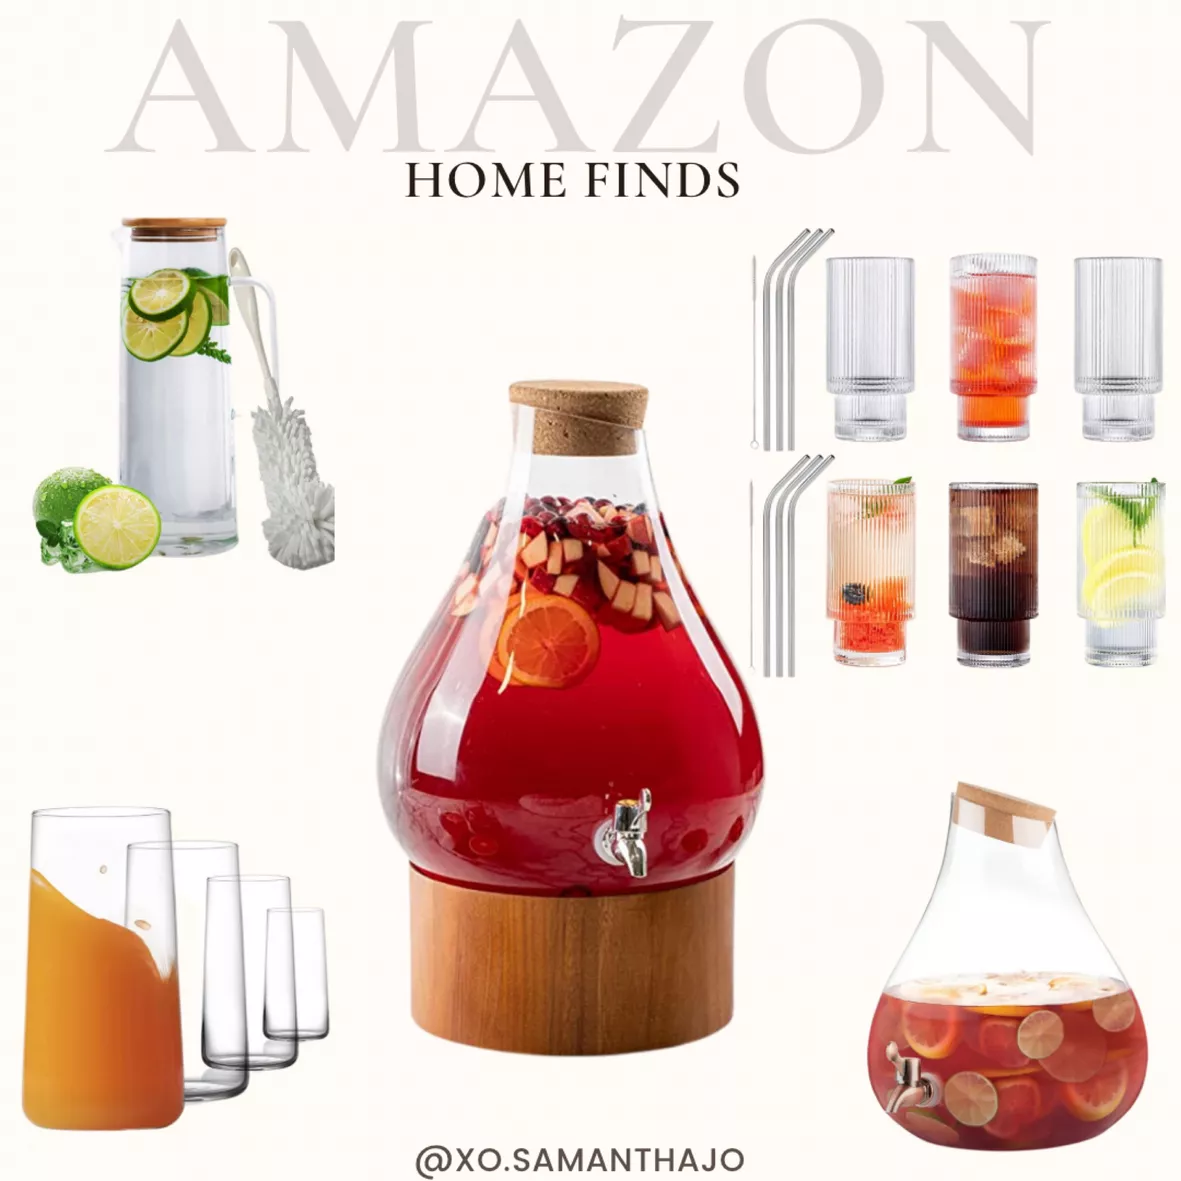 hjn Glass Water Pitcher with Wood Lid Water Carafe with Handle - Fridge  Glass Jug for Hot/Cold Water & Iced Tea Beverage, juice